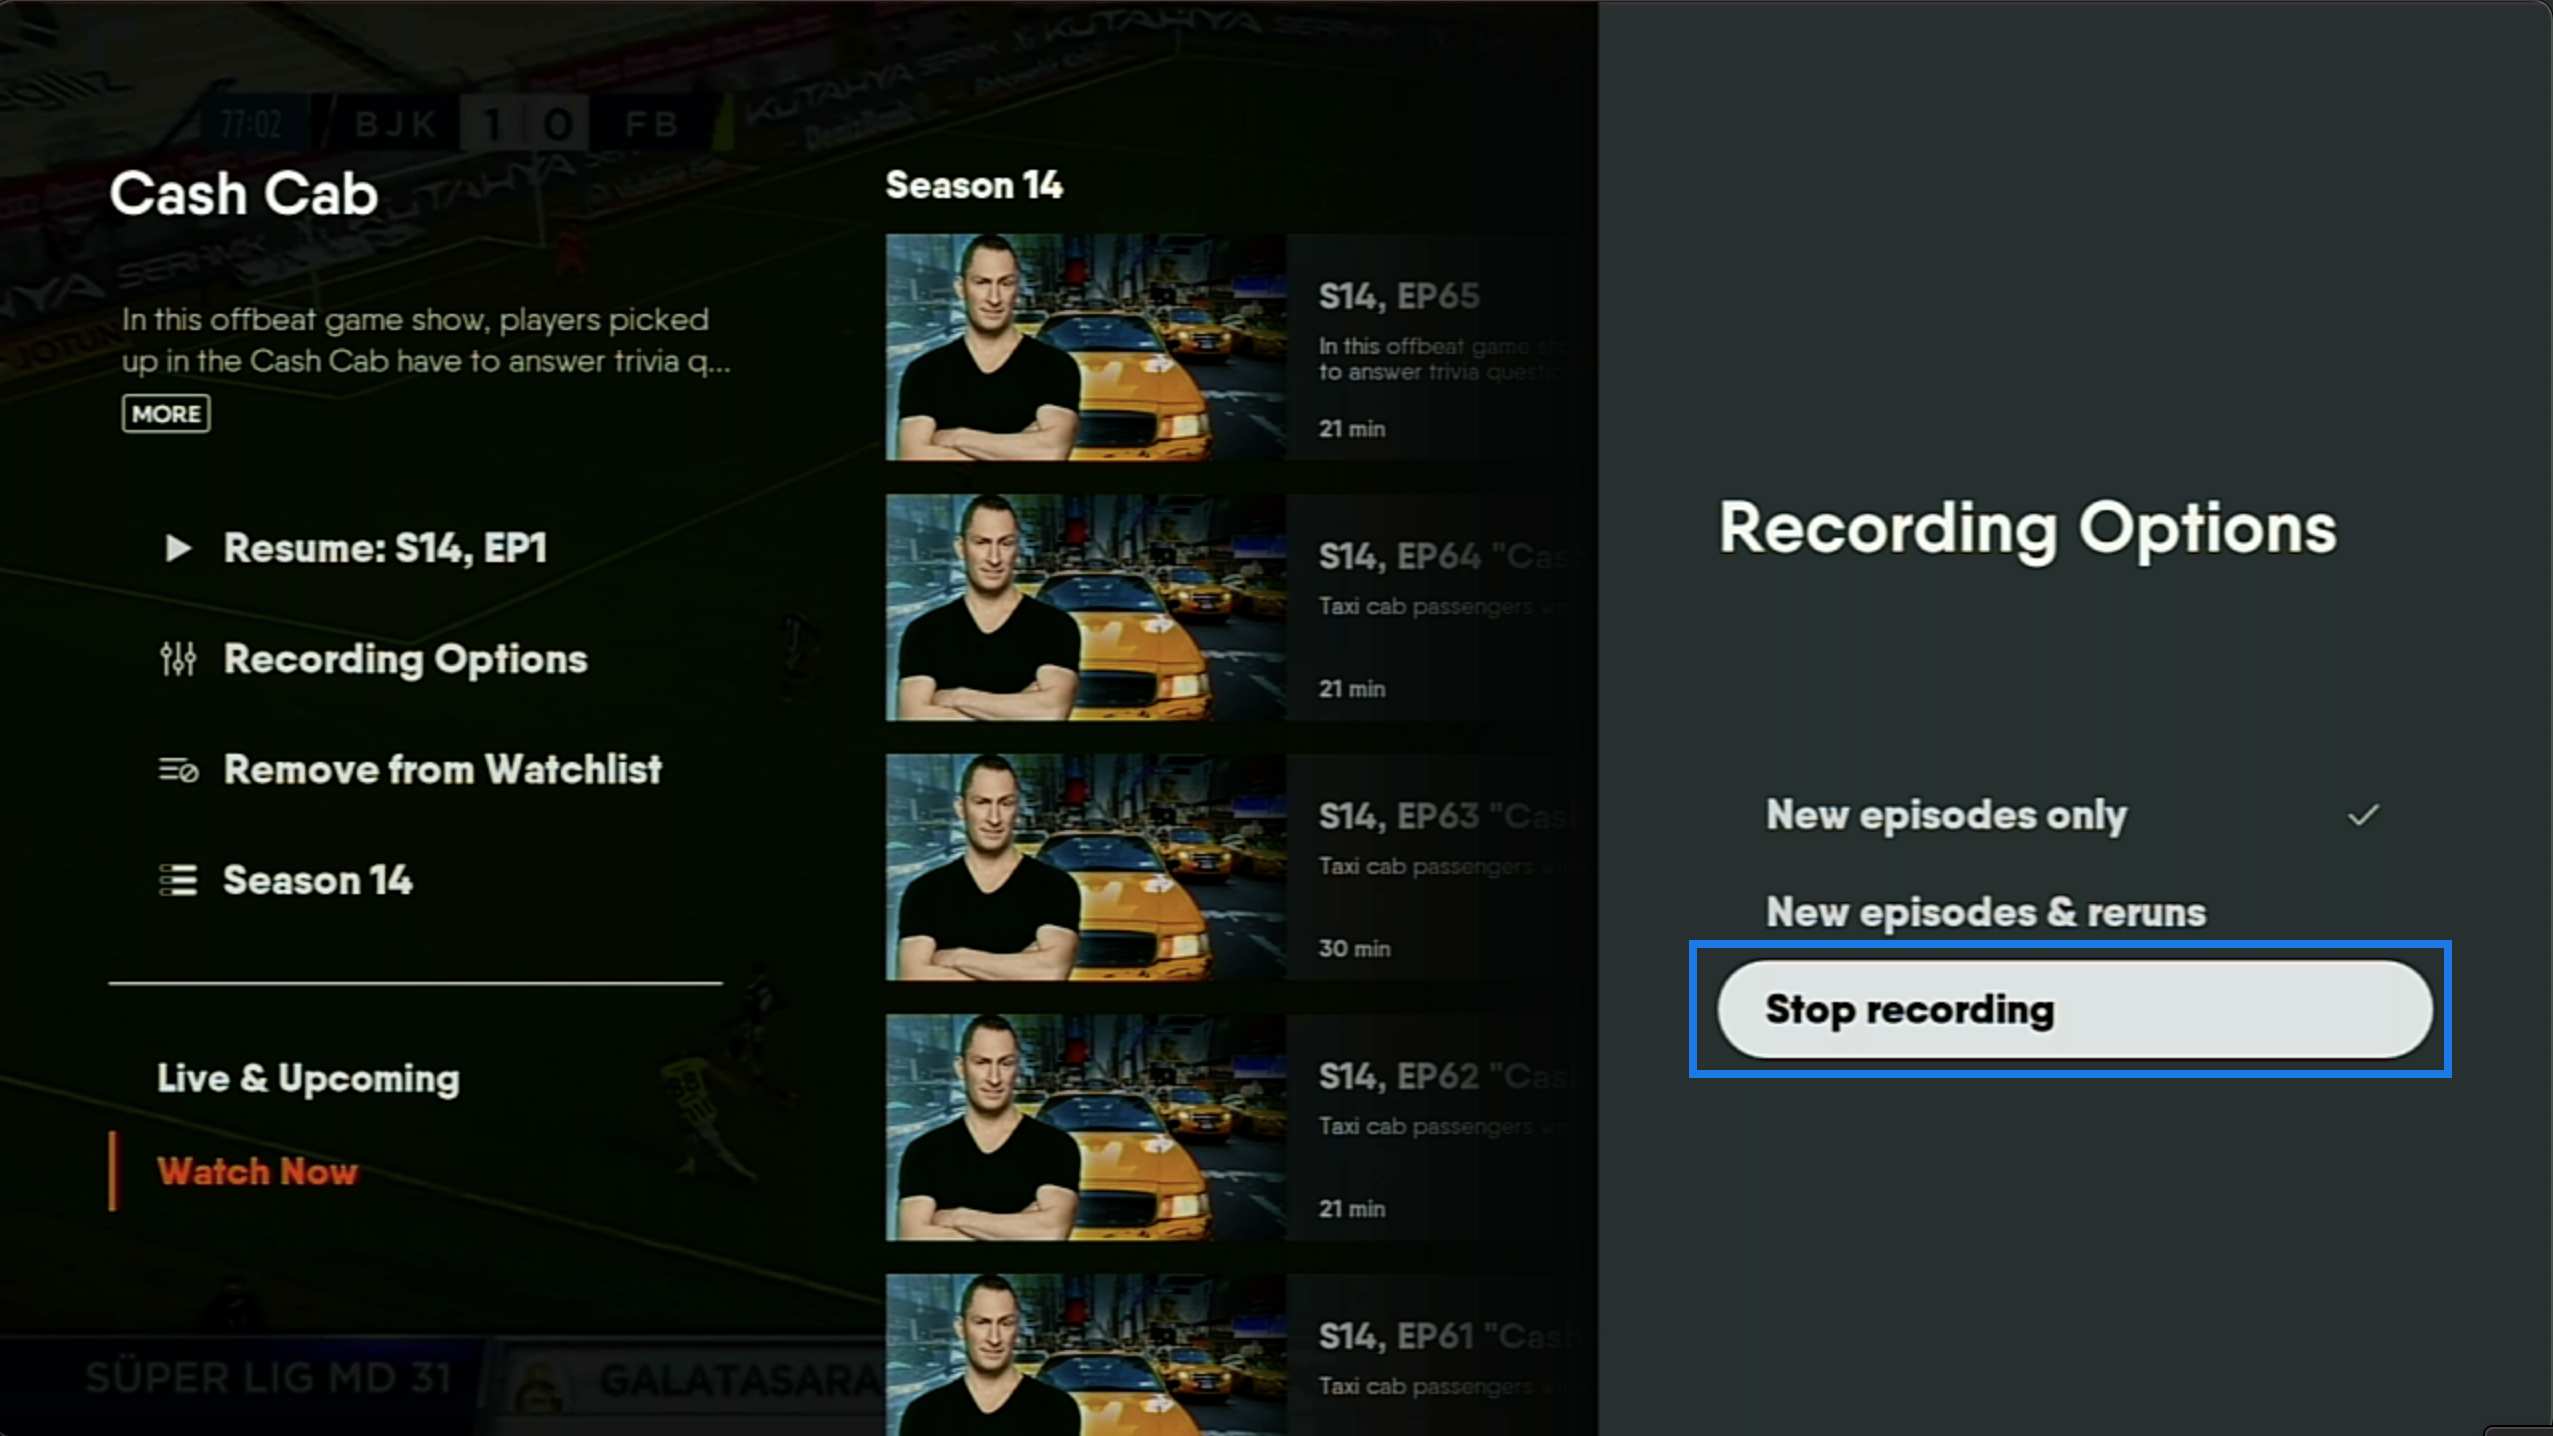 Series details page of the FuboTV app on Roku with recording options shown and STOP RECORDING highlighted